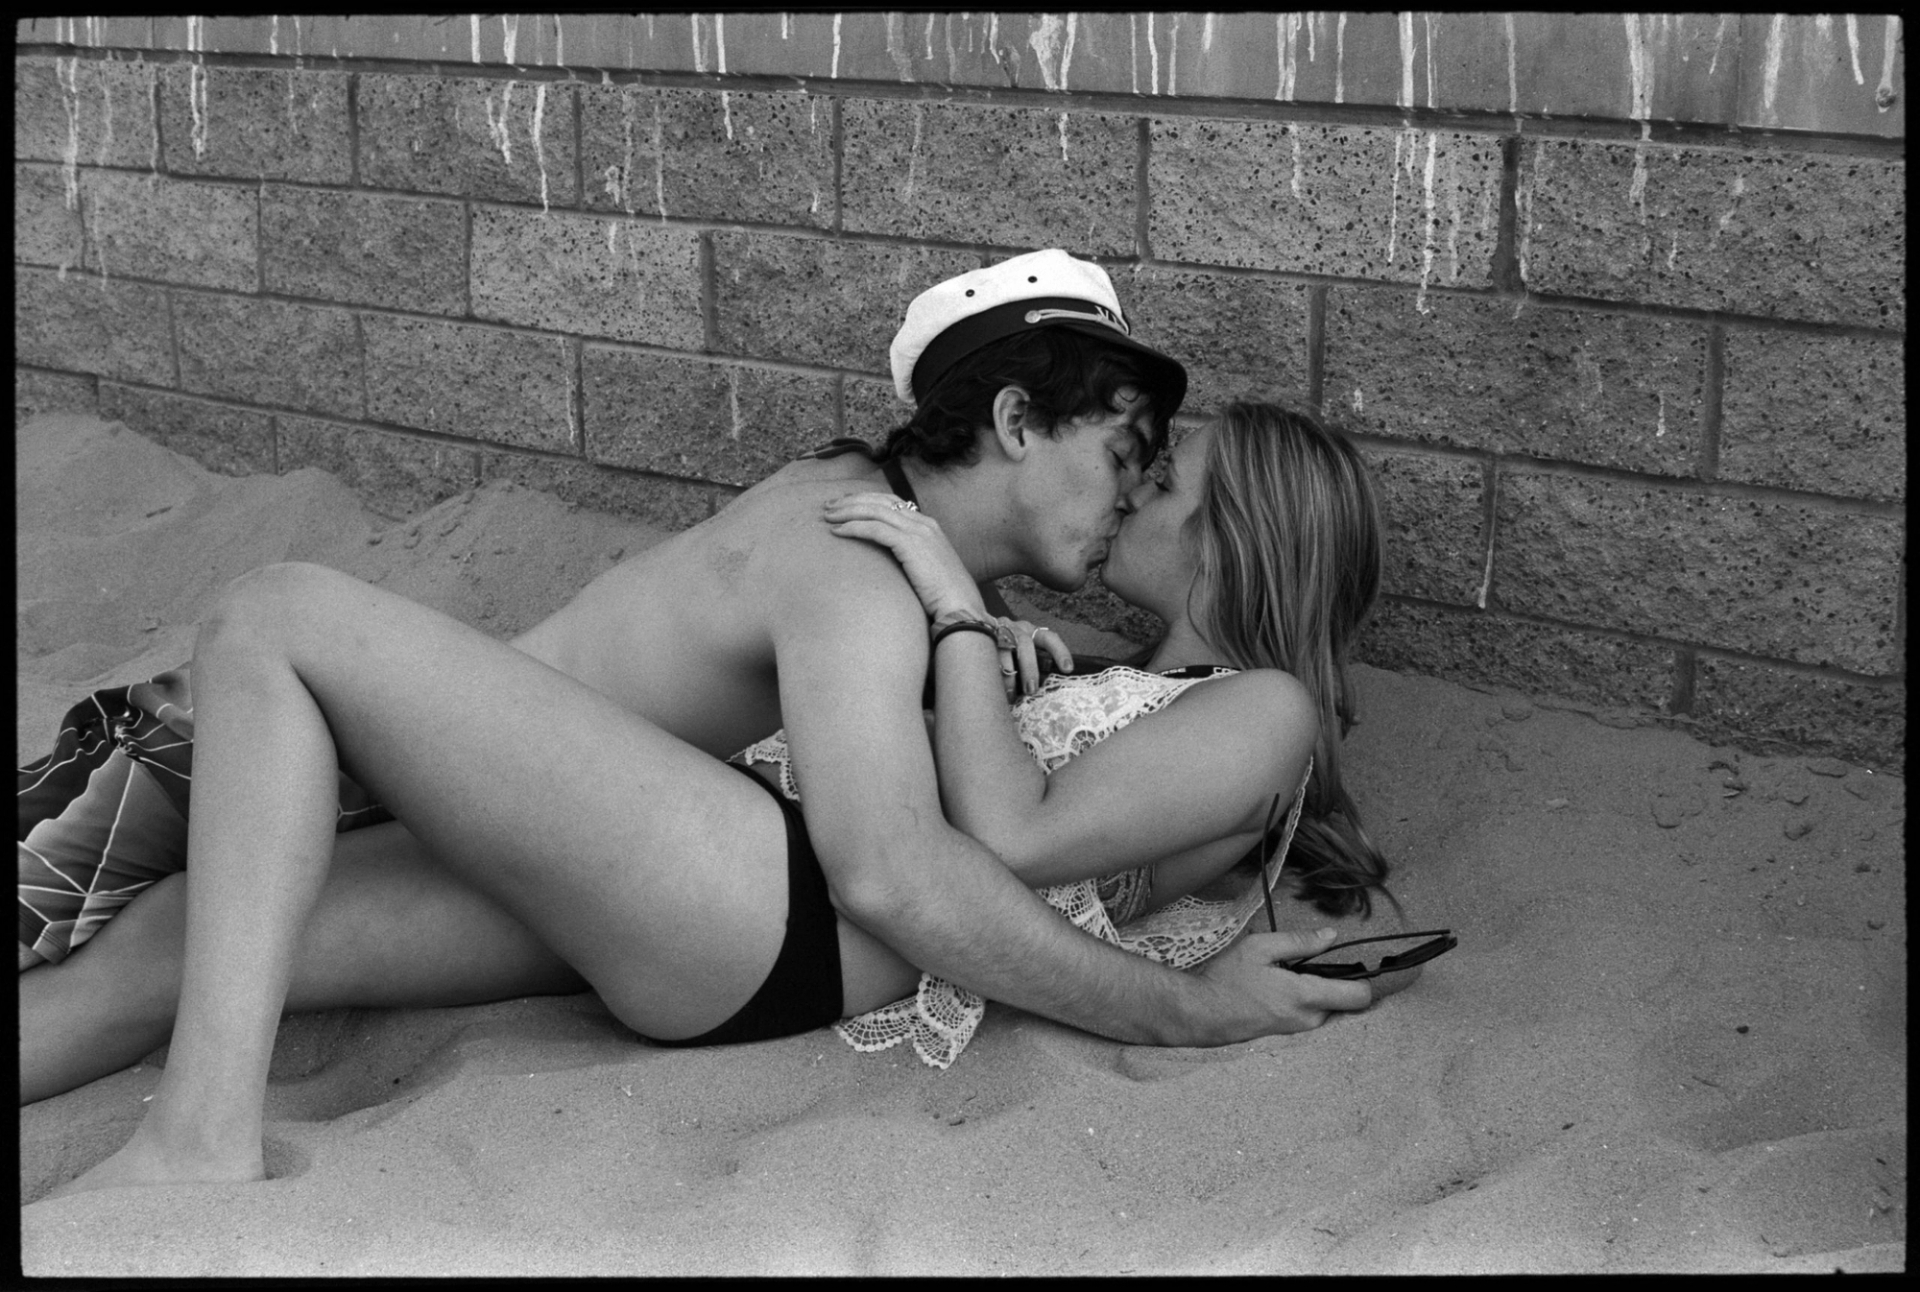 Ed Templeton, Kissing Kids, HB 2012. Courtesy of the artist and Roberts Projects, Los Angeles.